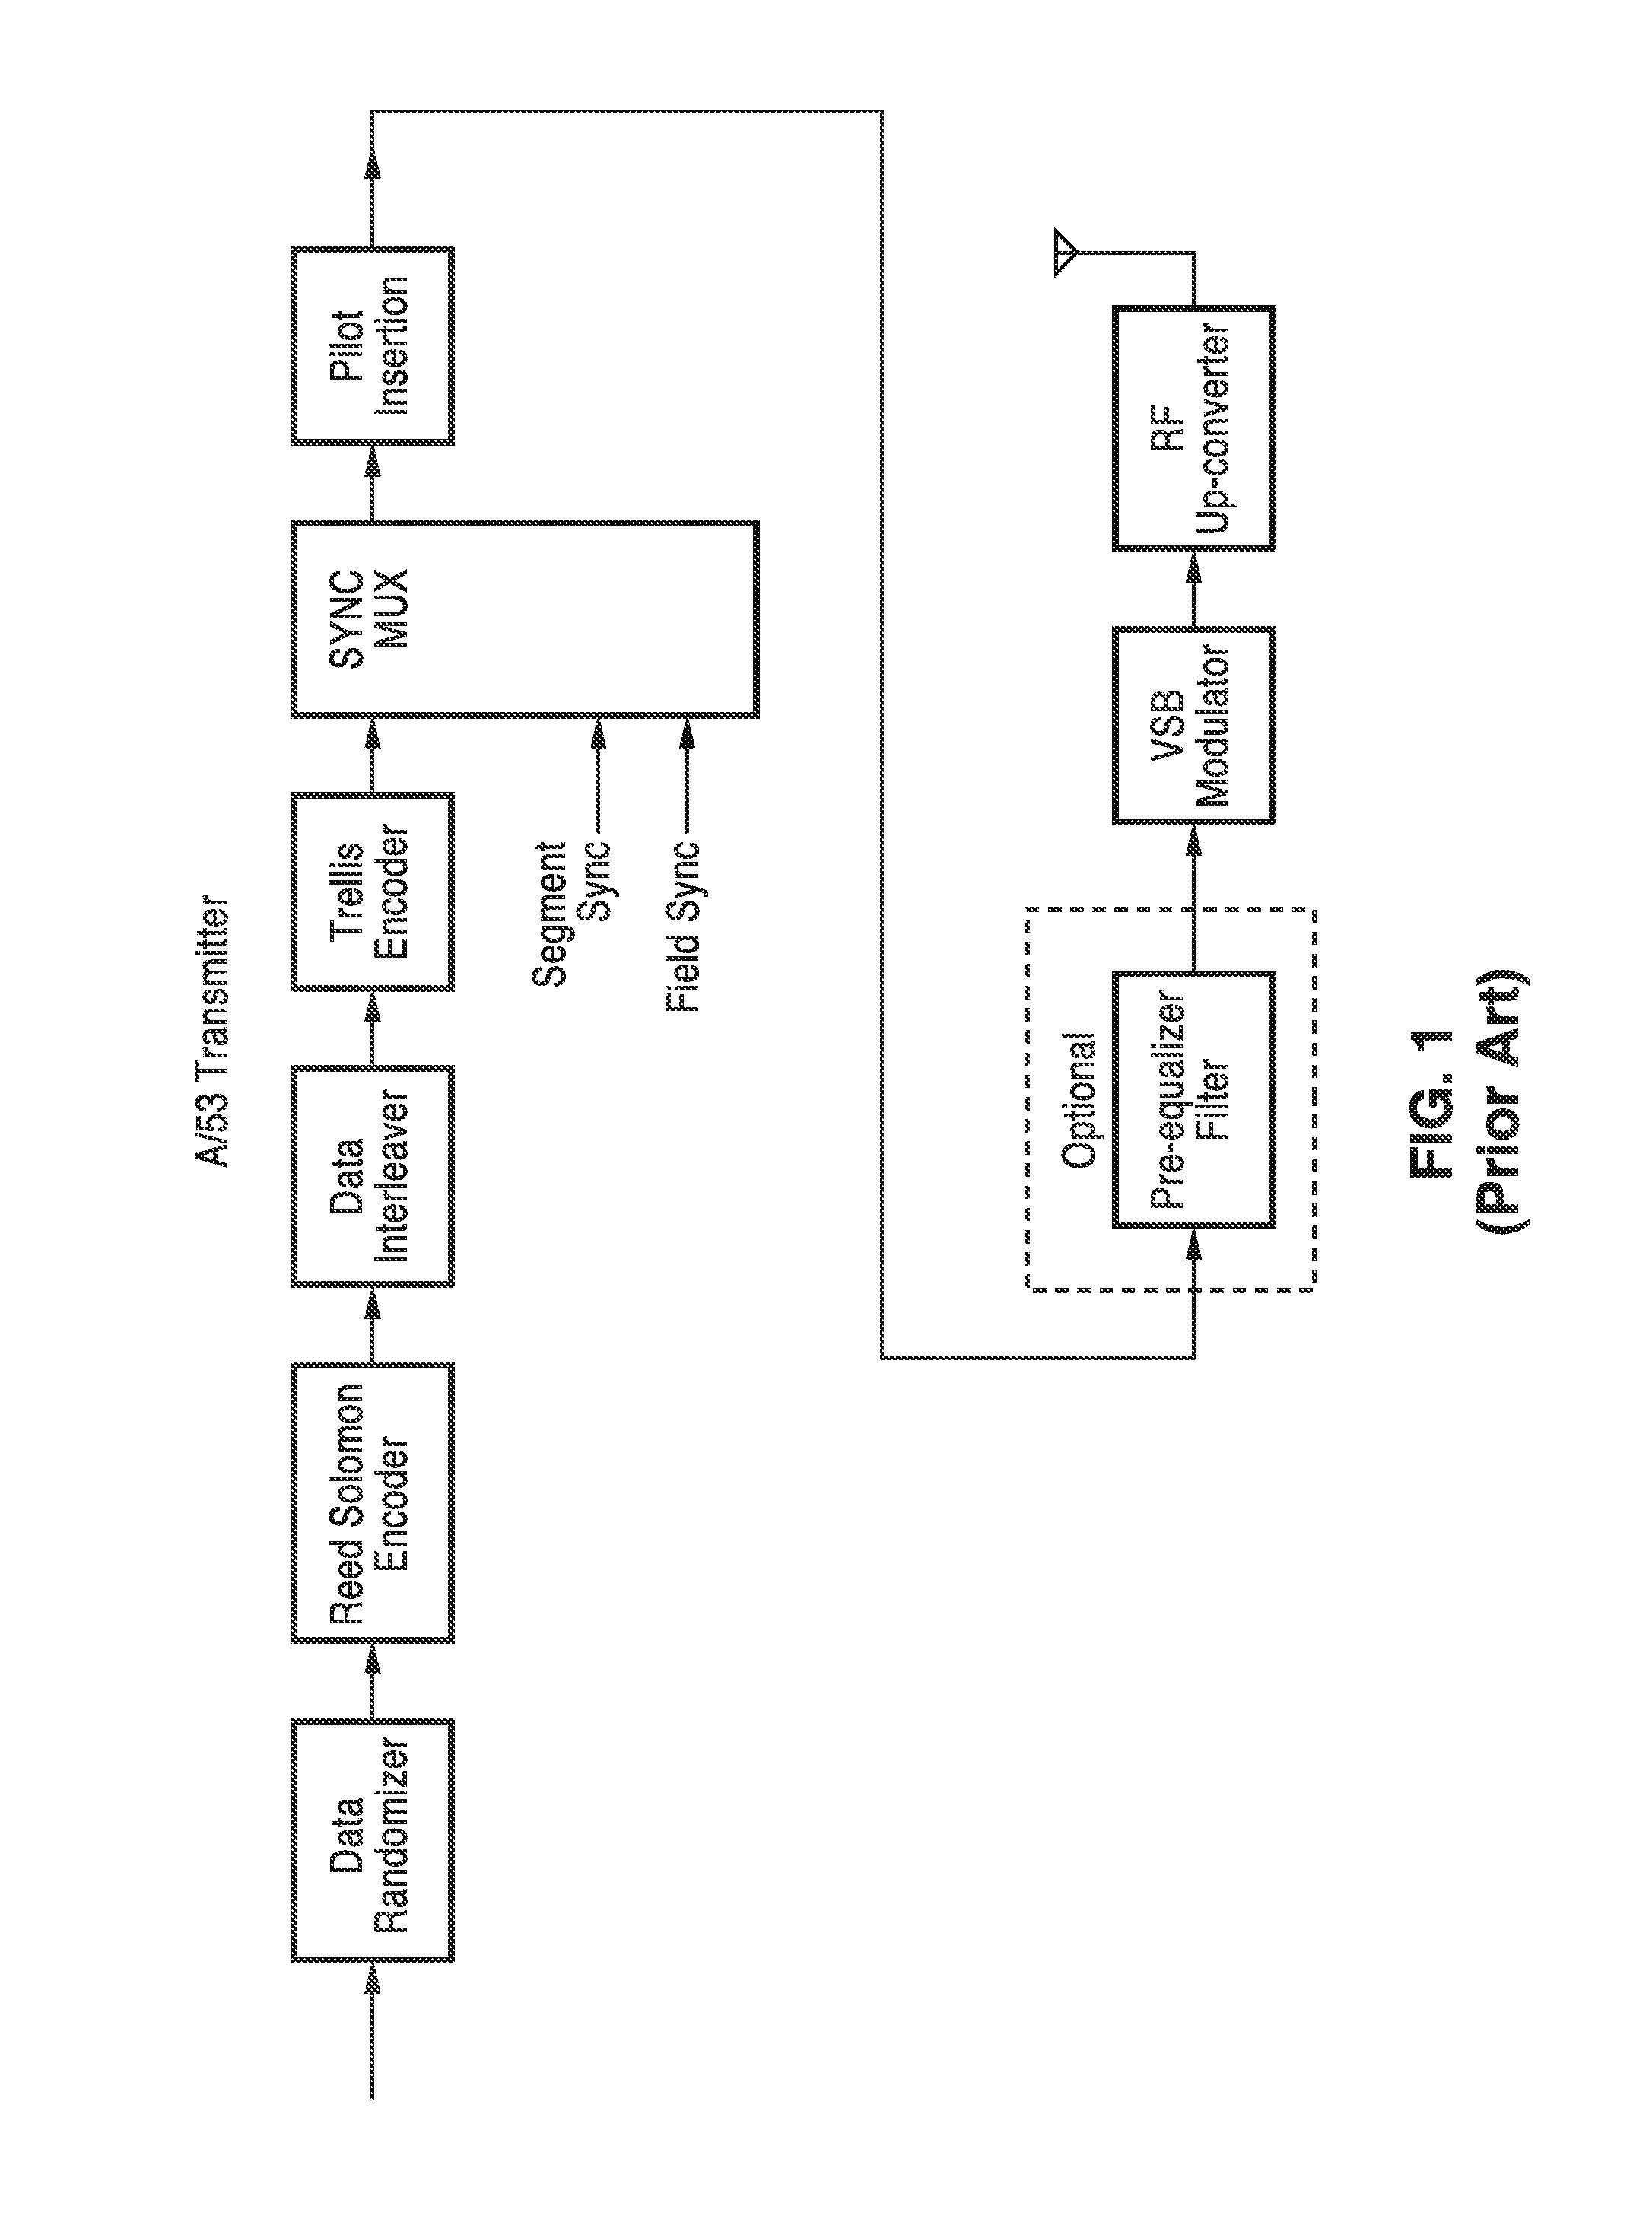 Combination a/53 and a/153 receiver using a hiho viterbi decoder